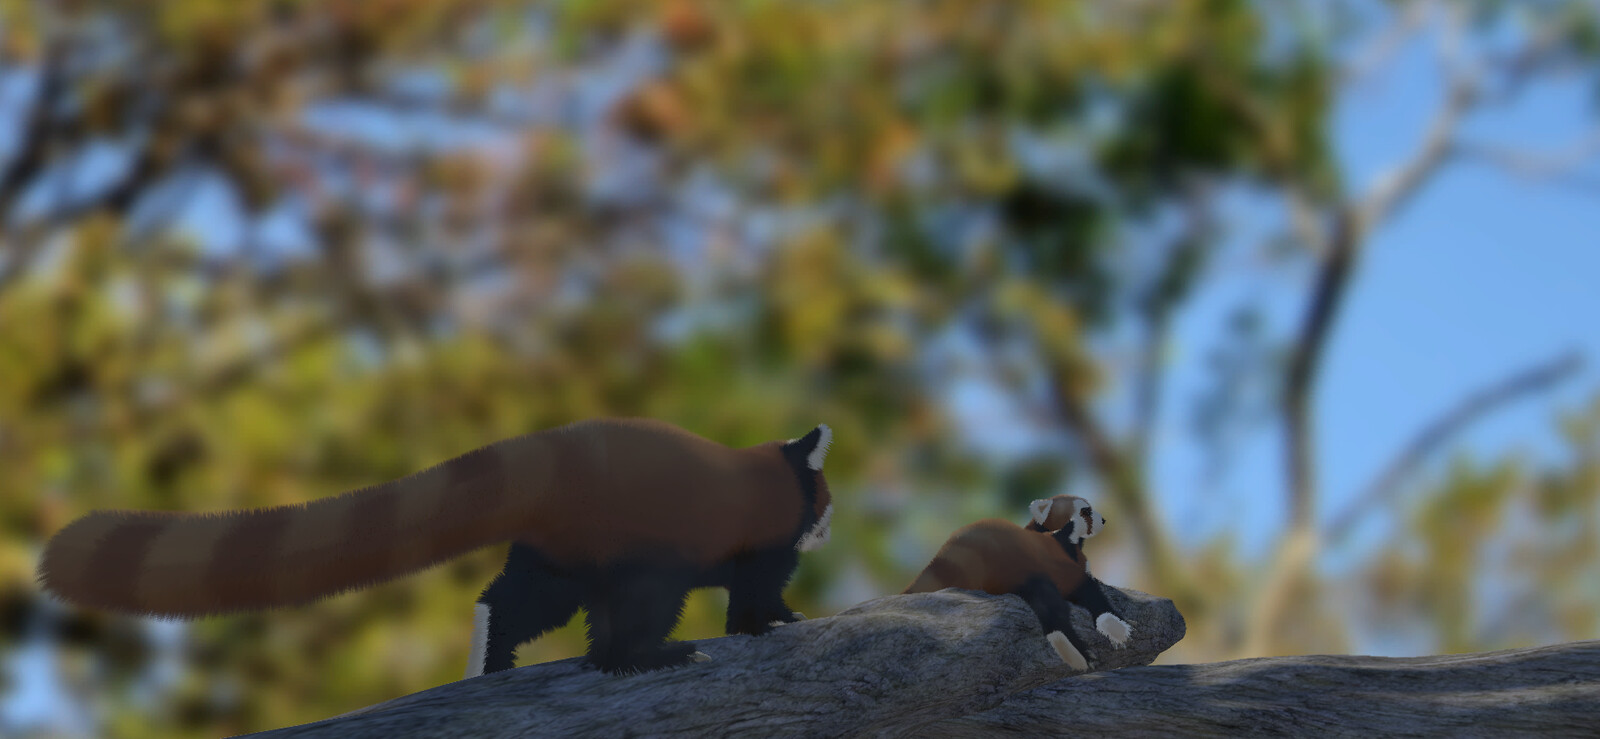 Red pandas in Unity #3